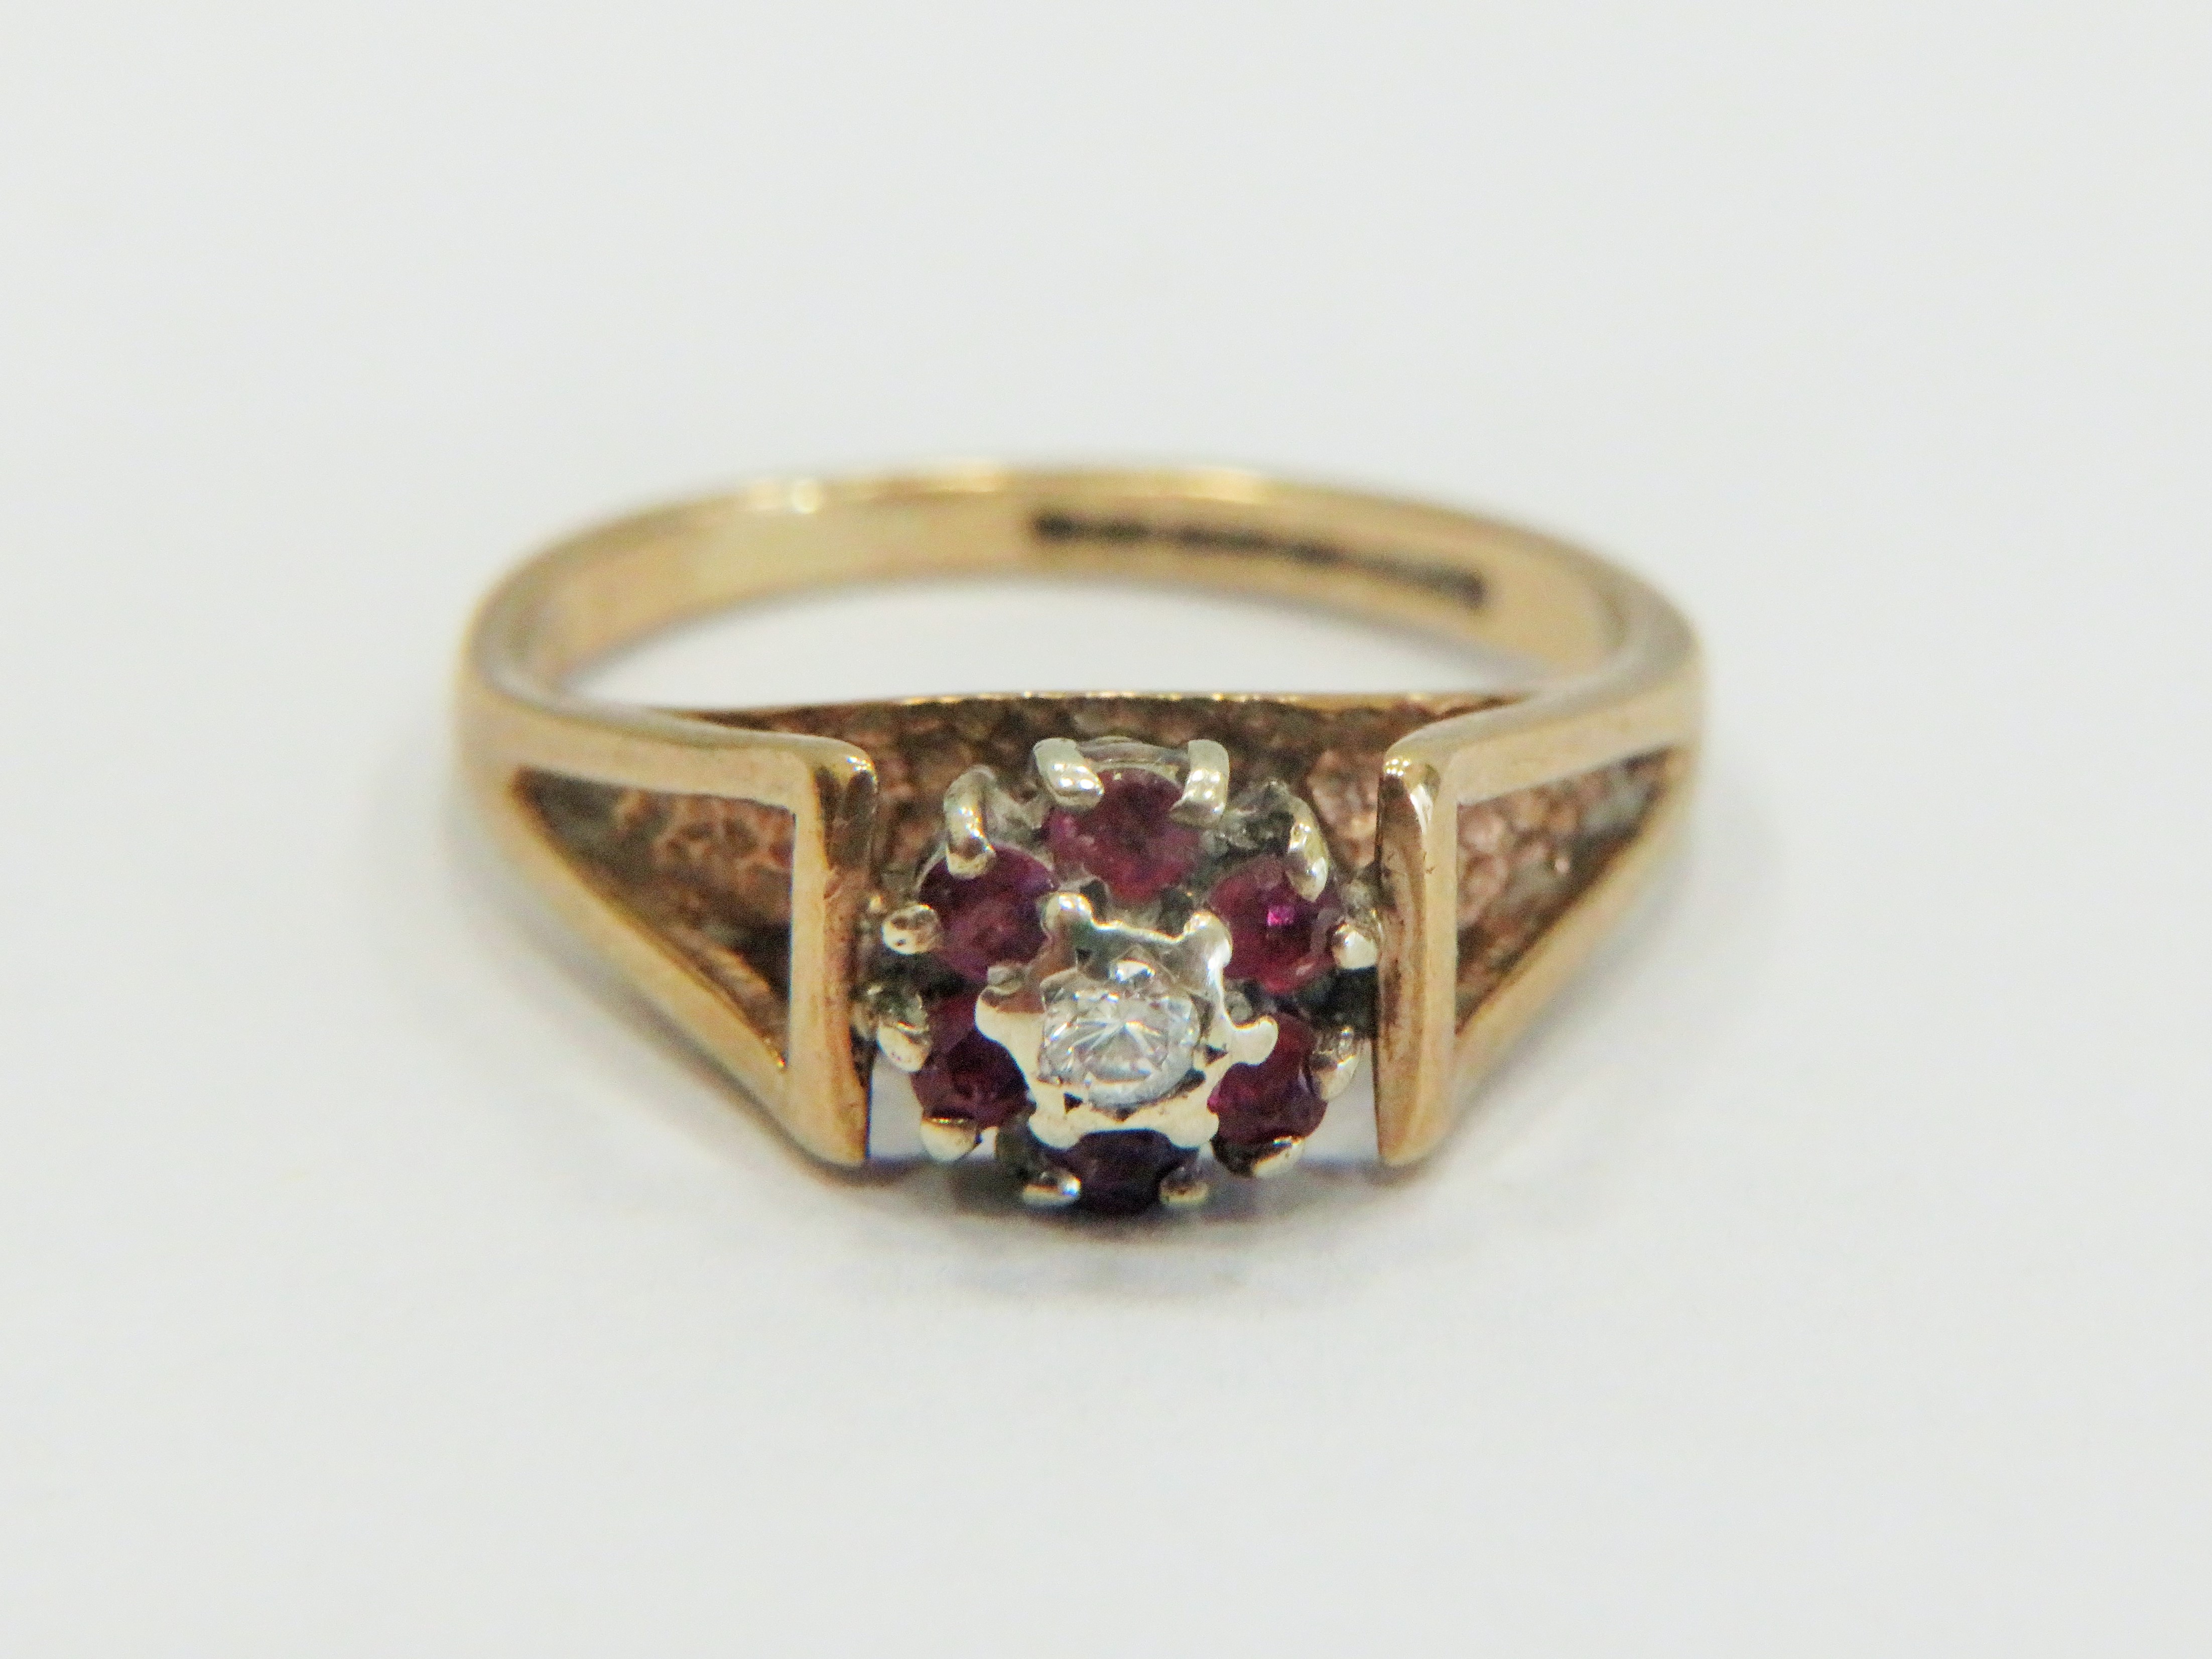 9ct Yellow Gold Ring set with a small central Diamond, surrounded by small Rubies. Small finger size